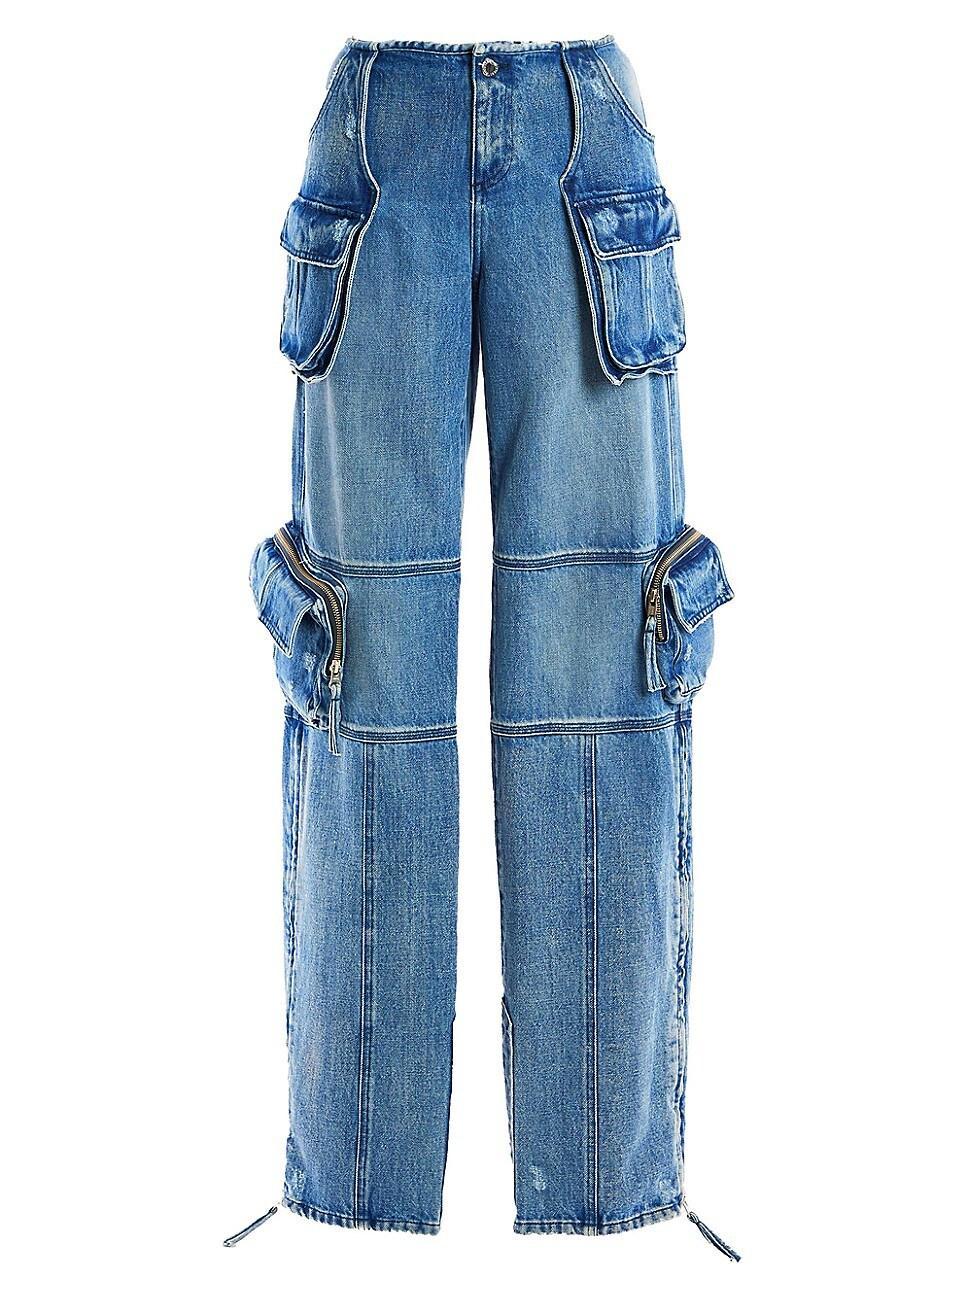 Tammy Low-Rise Zip-Cuff Cargo Denim Jeans Product Image